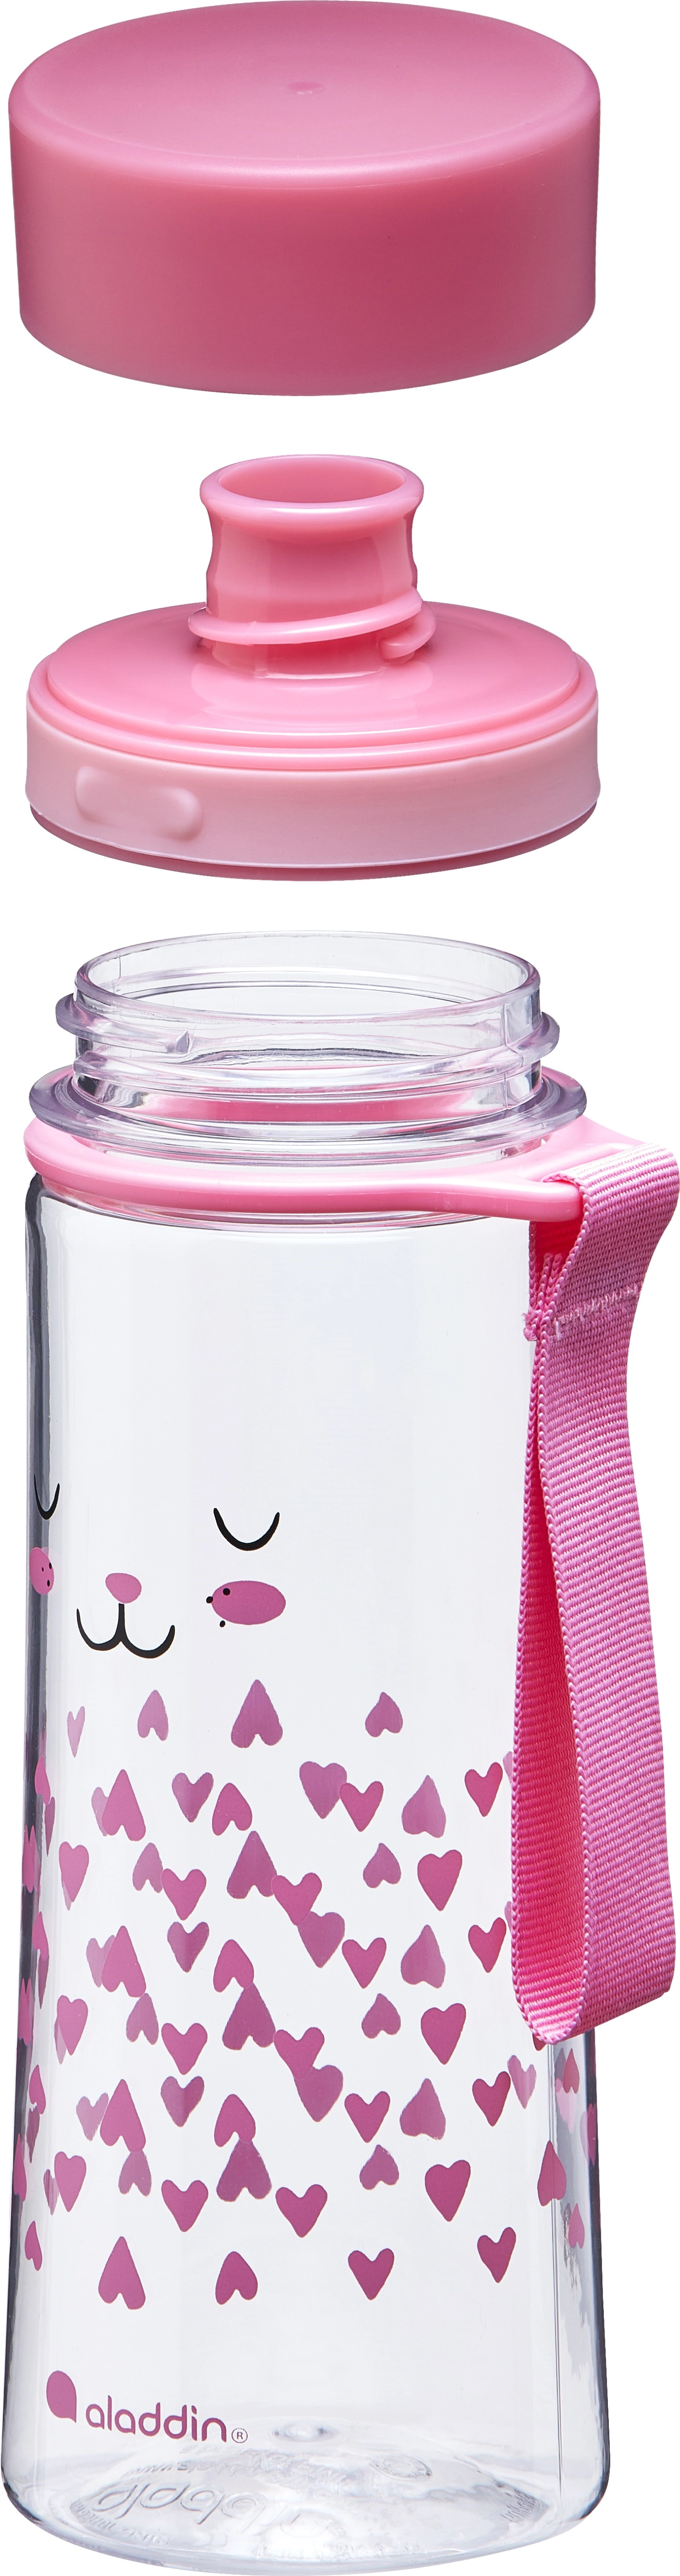 Aladdin my first aveo bunny water bottle for kids 0.35l rose